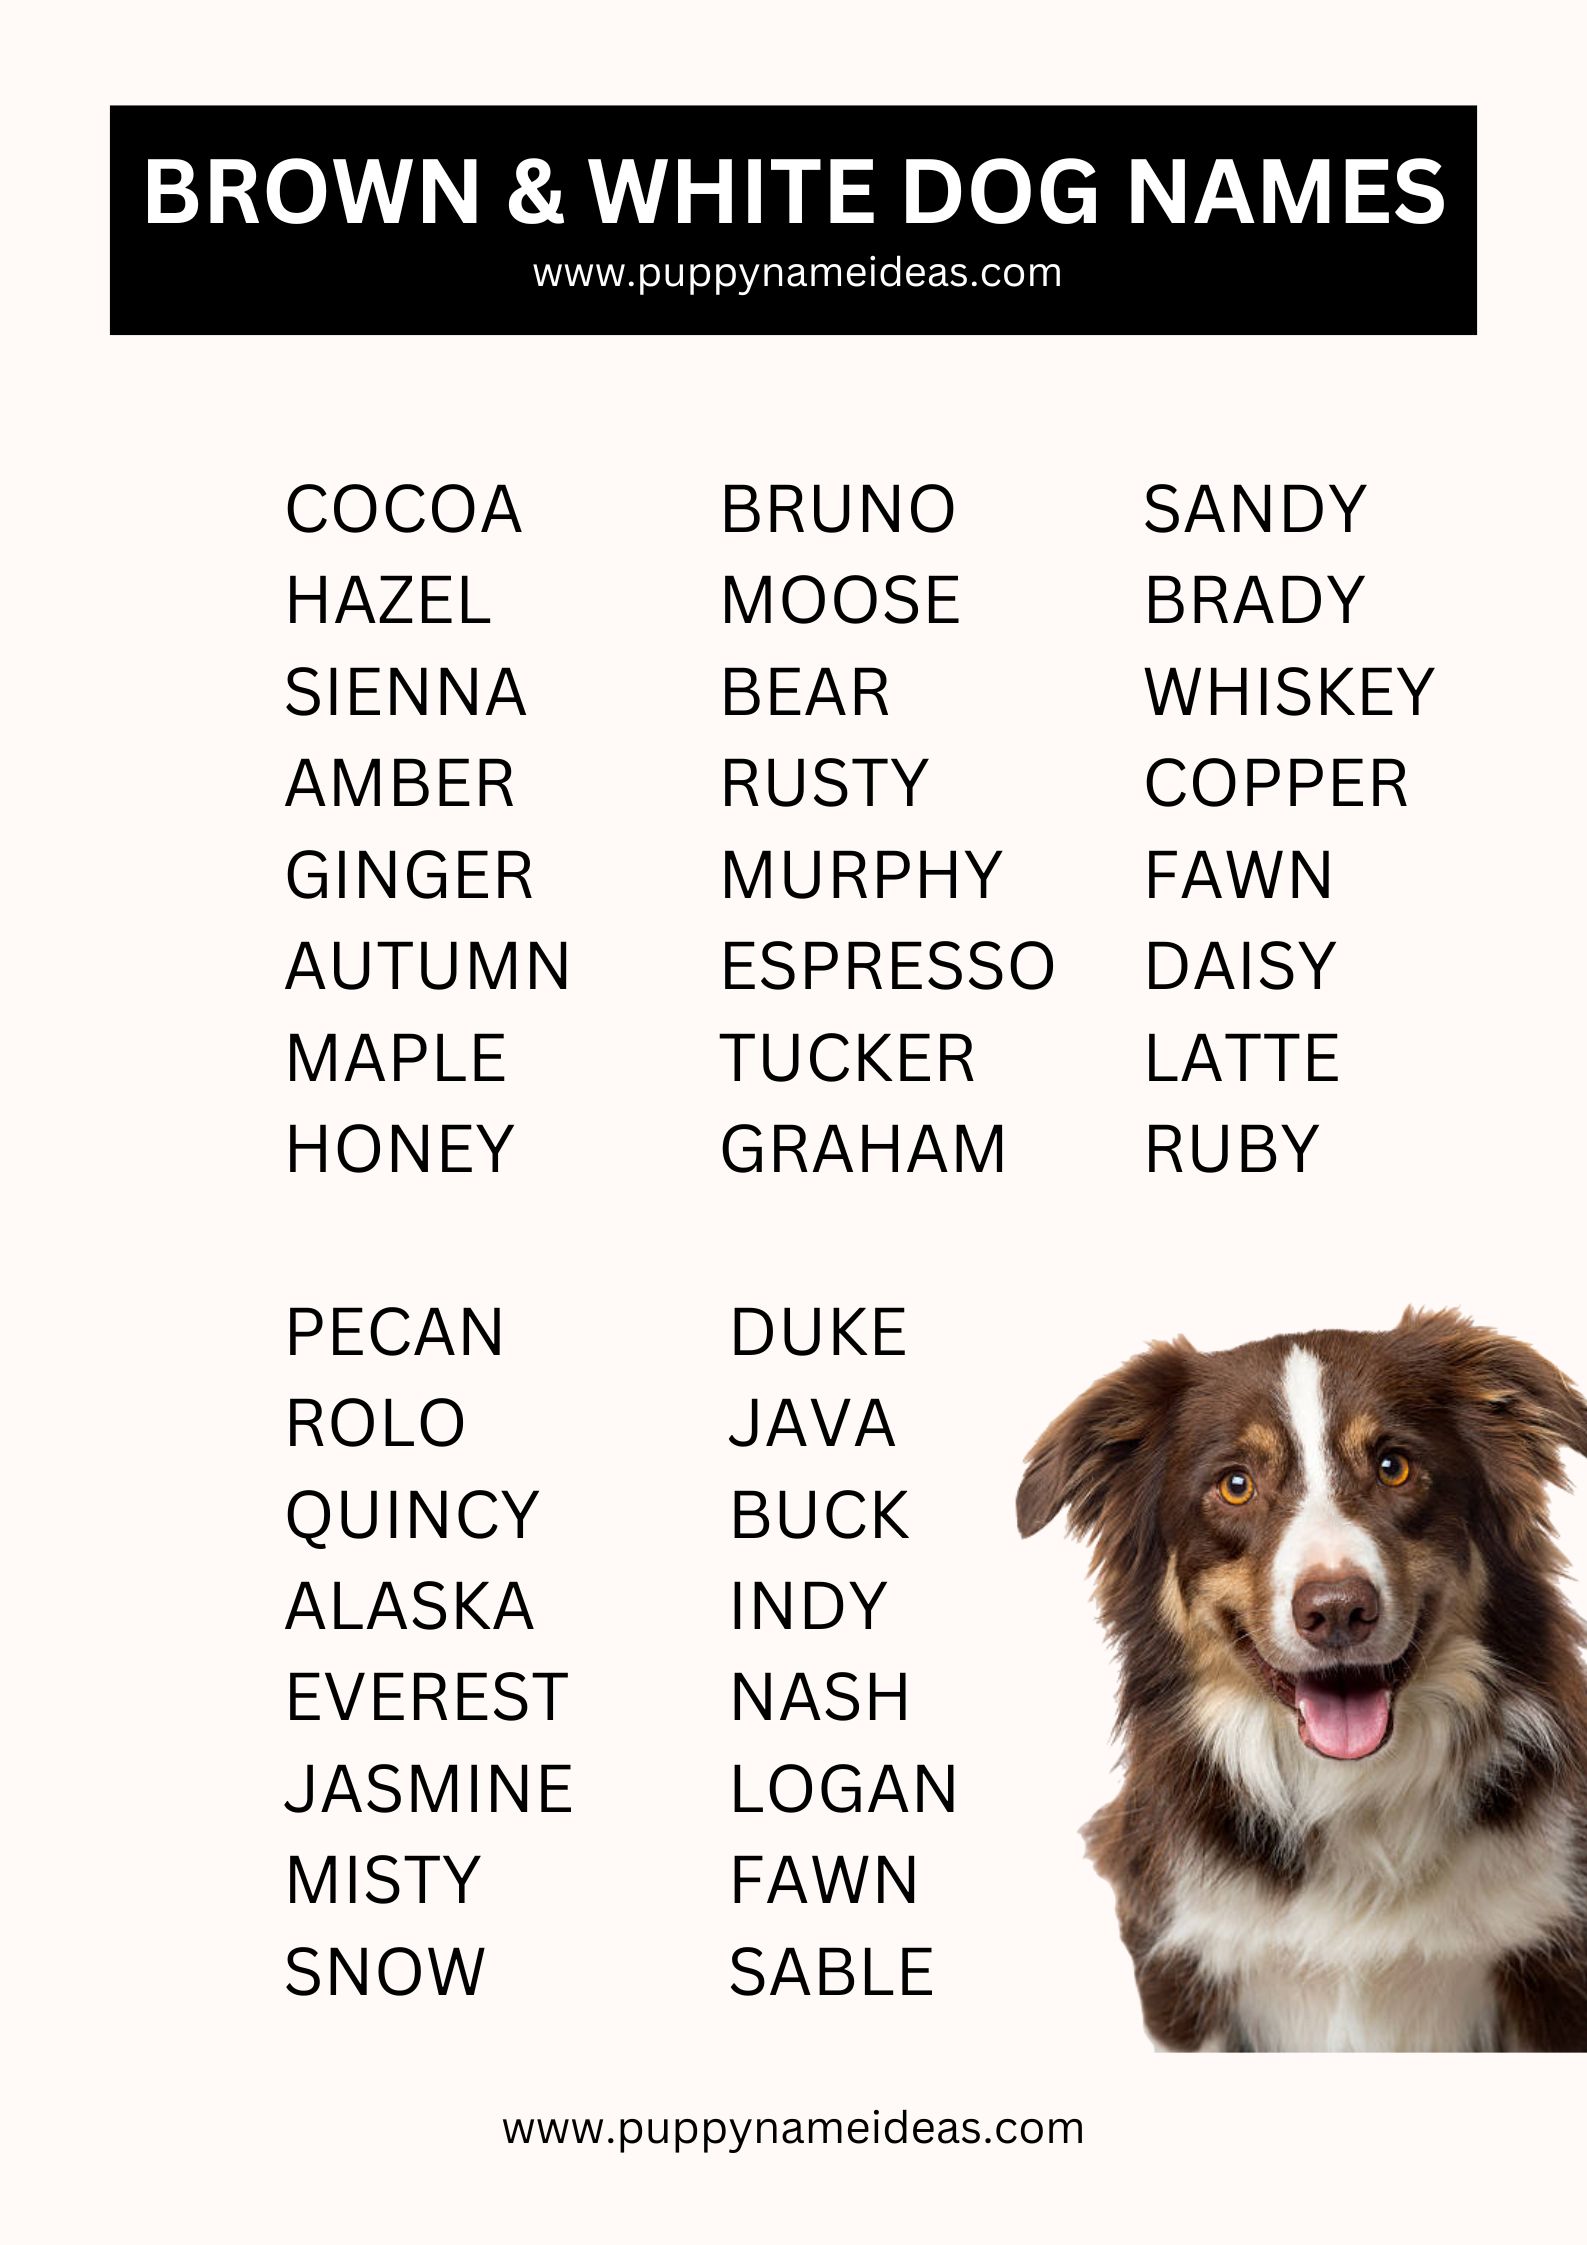 List Of Brown & White Dog Names